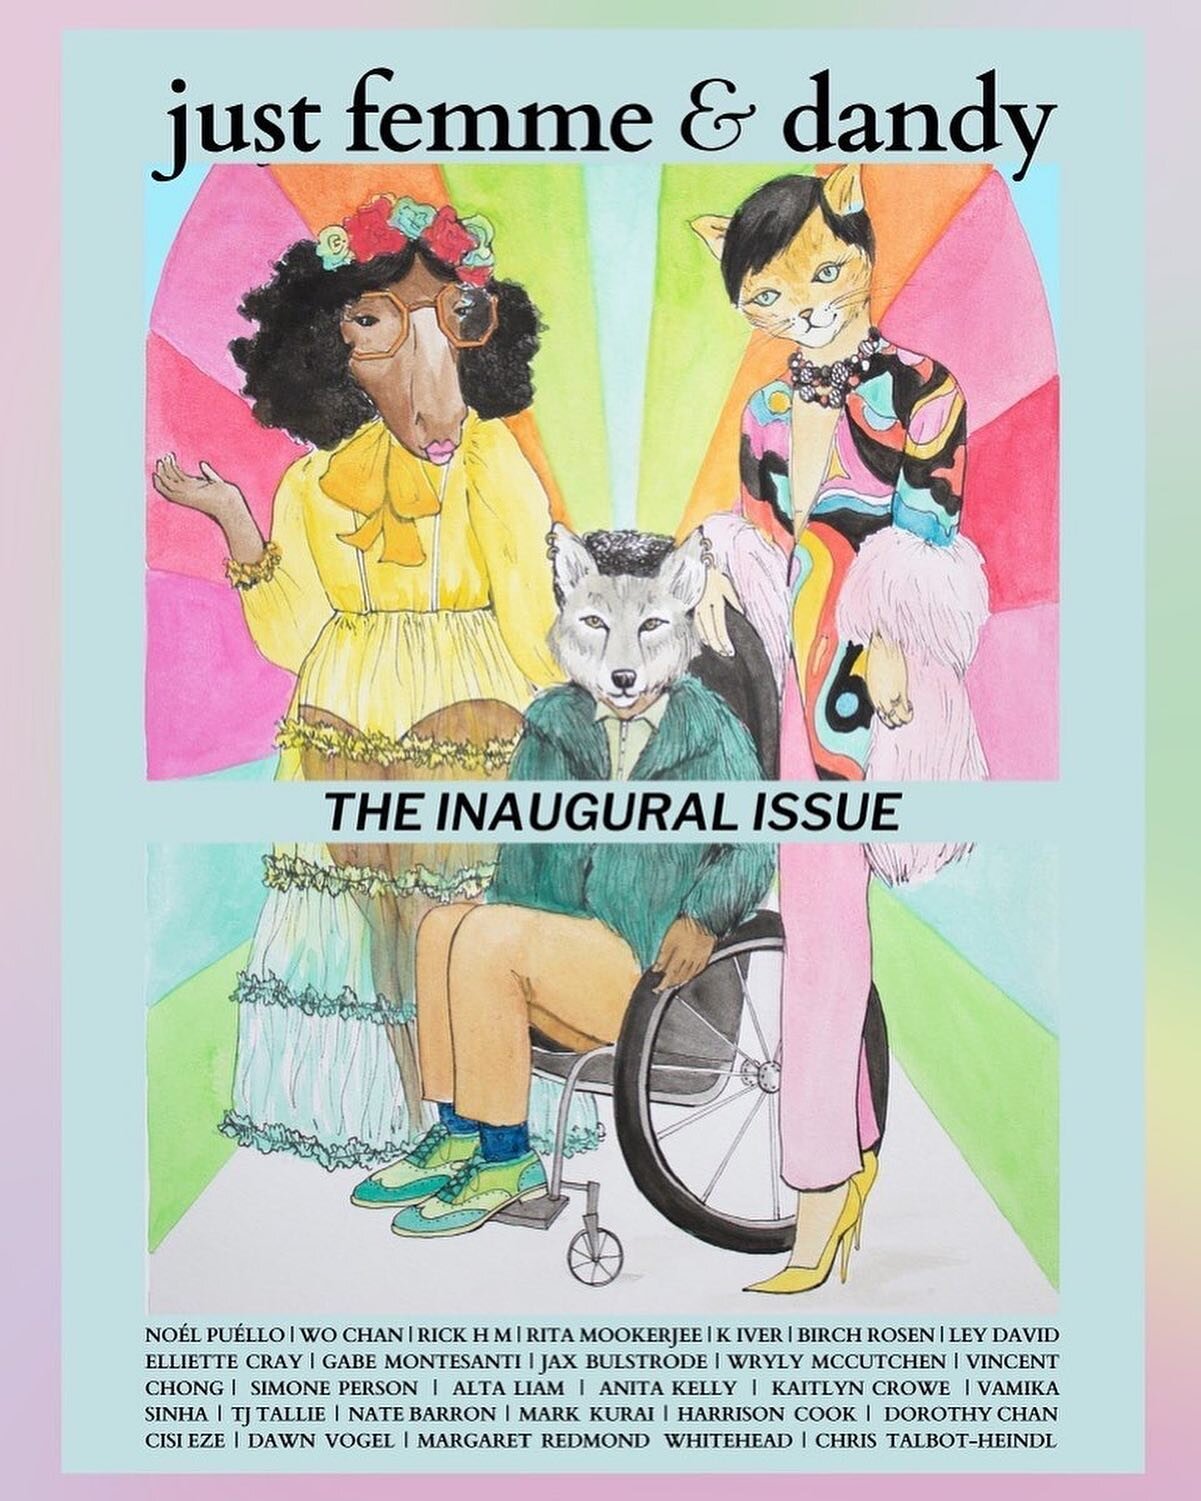 I&rsquo;m so happy to announce that the first issue of @justfemmeanddandymag is here! Please read and share our inaugural issue! Link in bio, we are besides ourselves with delight!
I made all the image descriptions and the audio description (with the